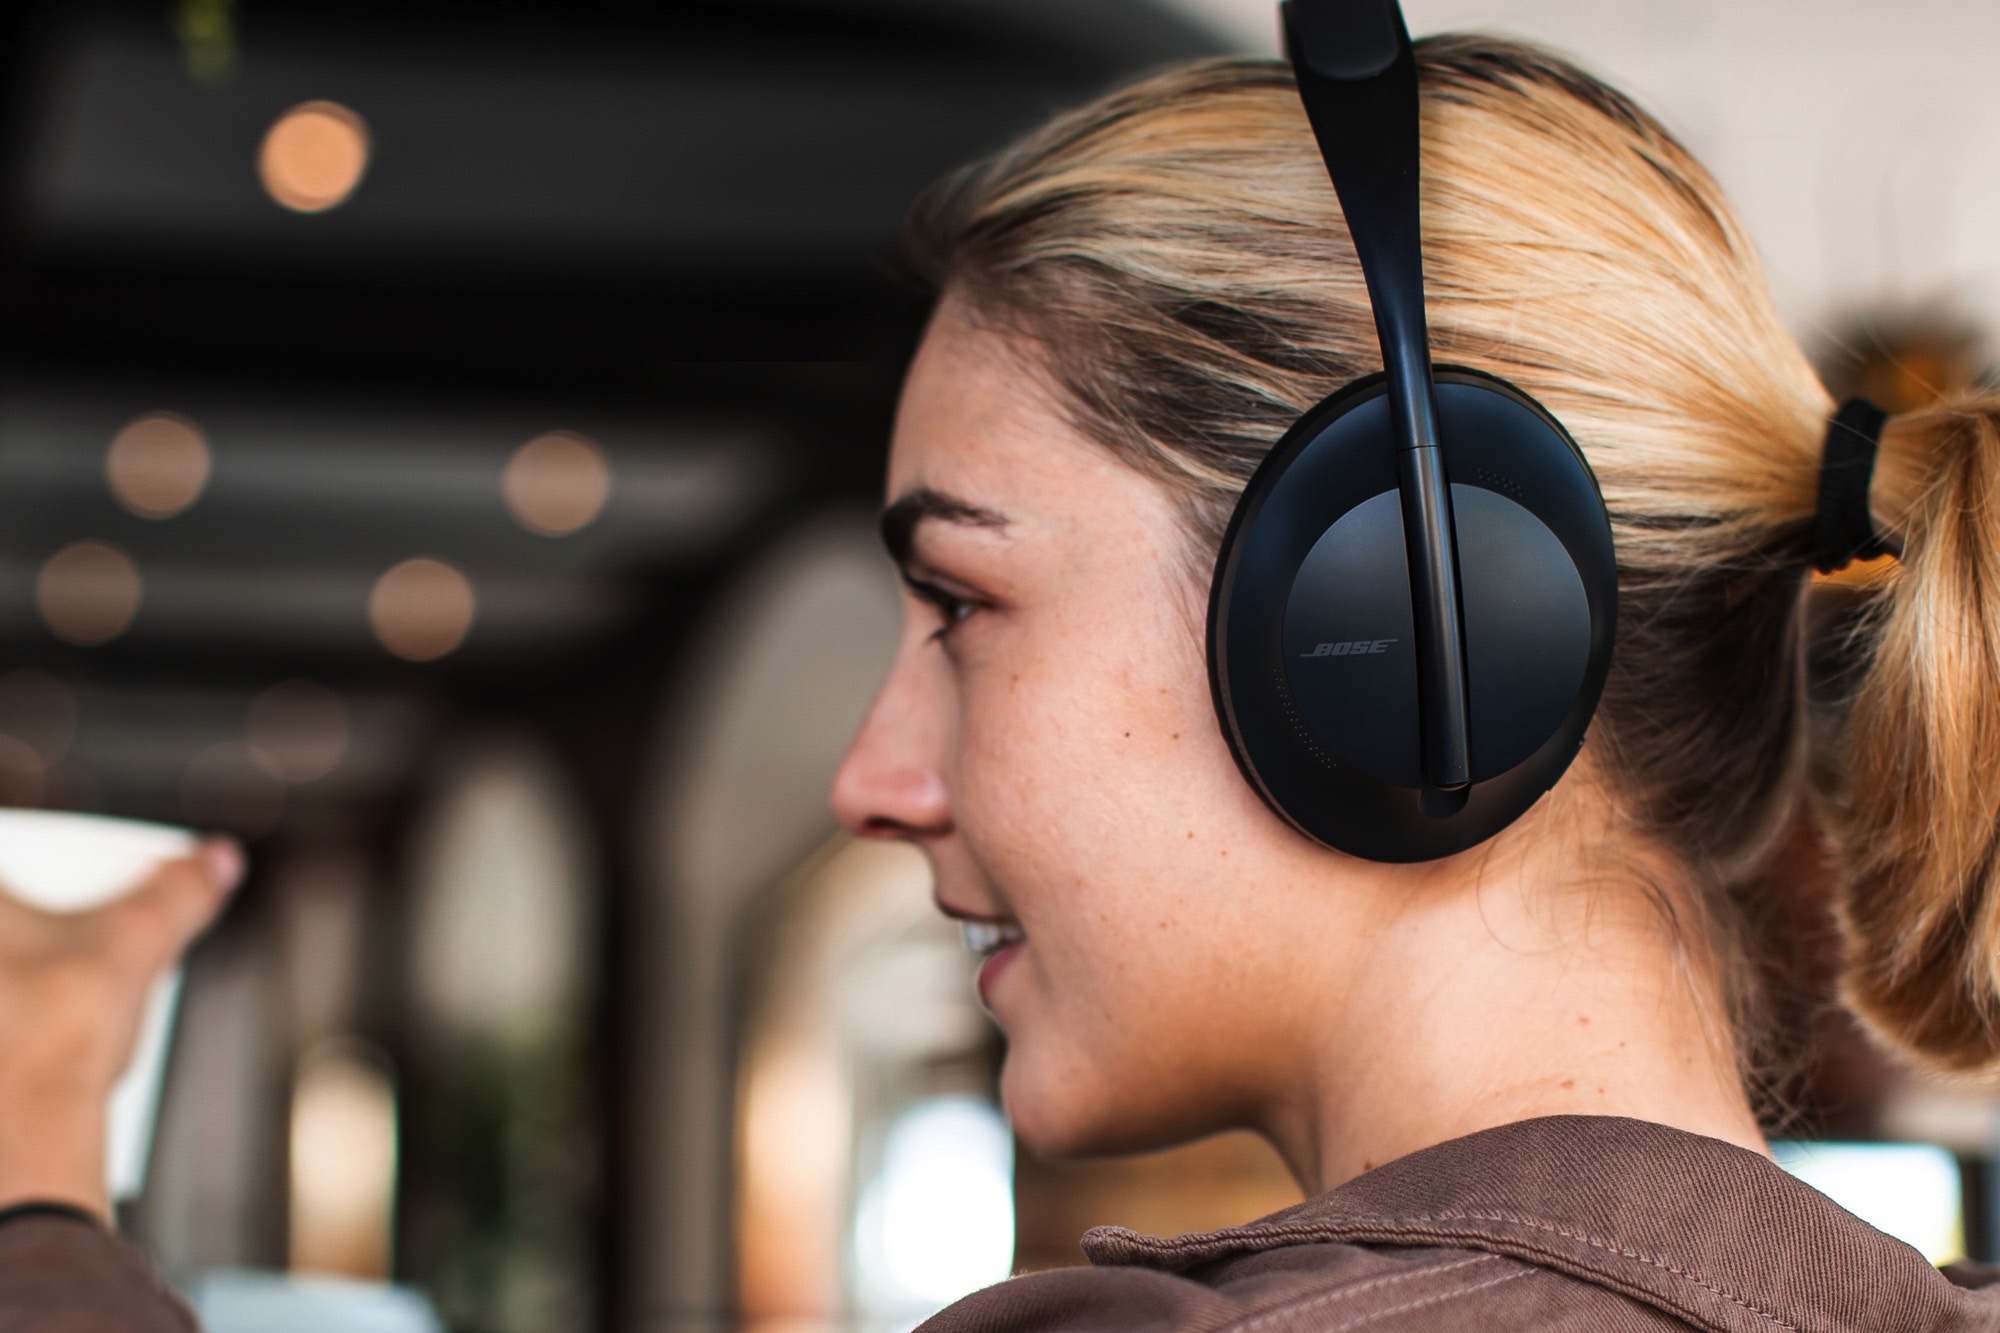 Bose's Noise Cancelling Headphones 700 have the upgrades we've